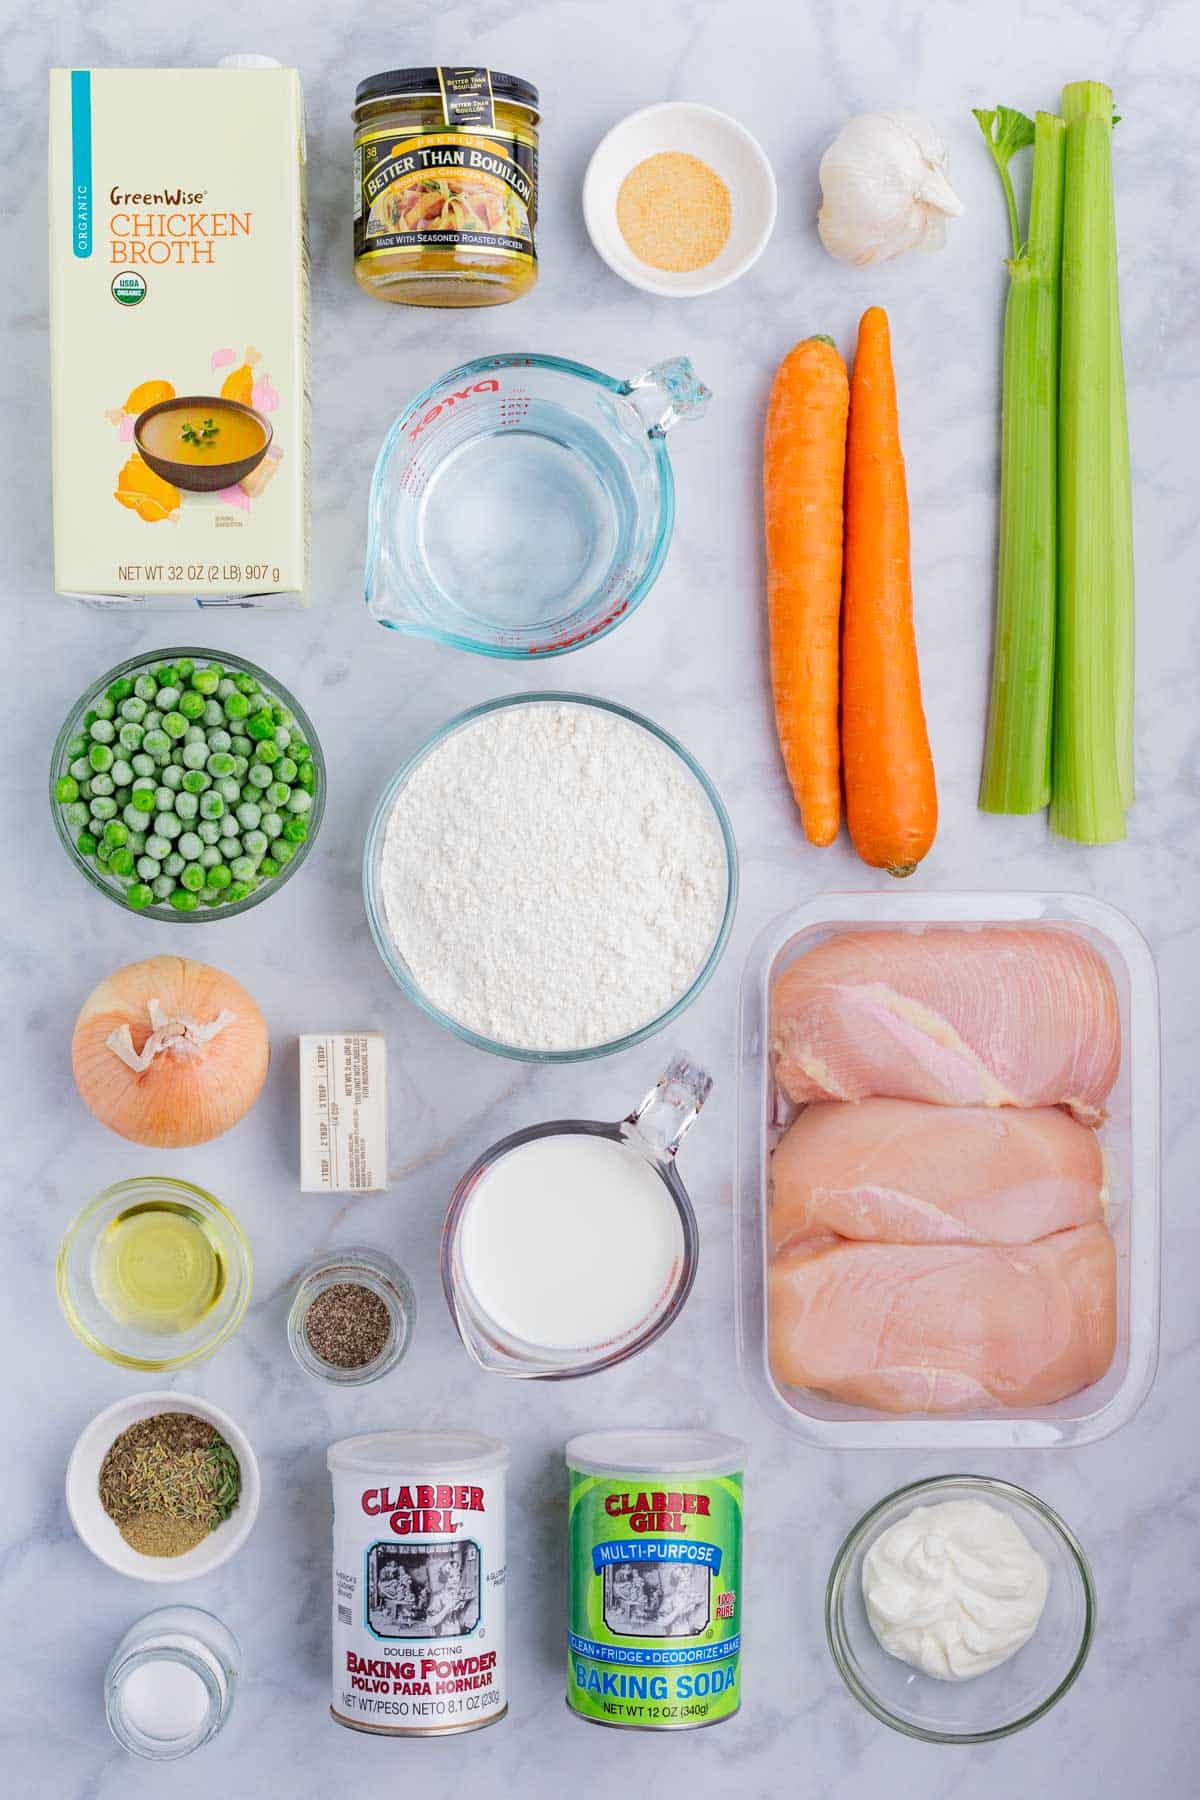 Chicken, celery, carrots, peas, flour, herbs, spices, and milk are the main ingredients for this dish.